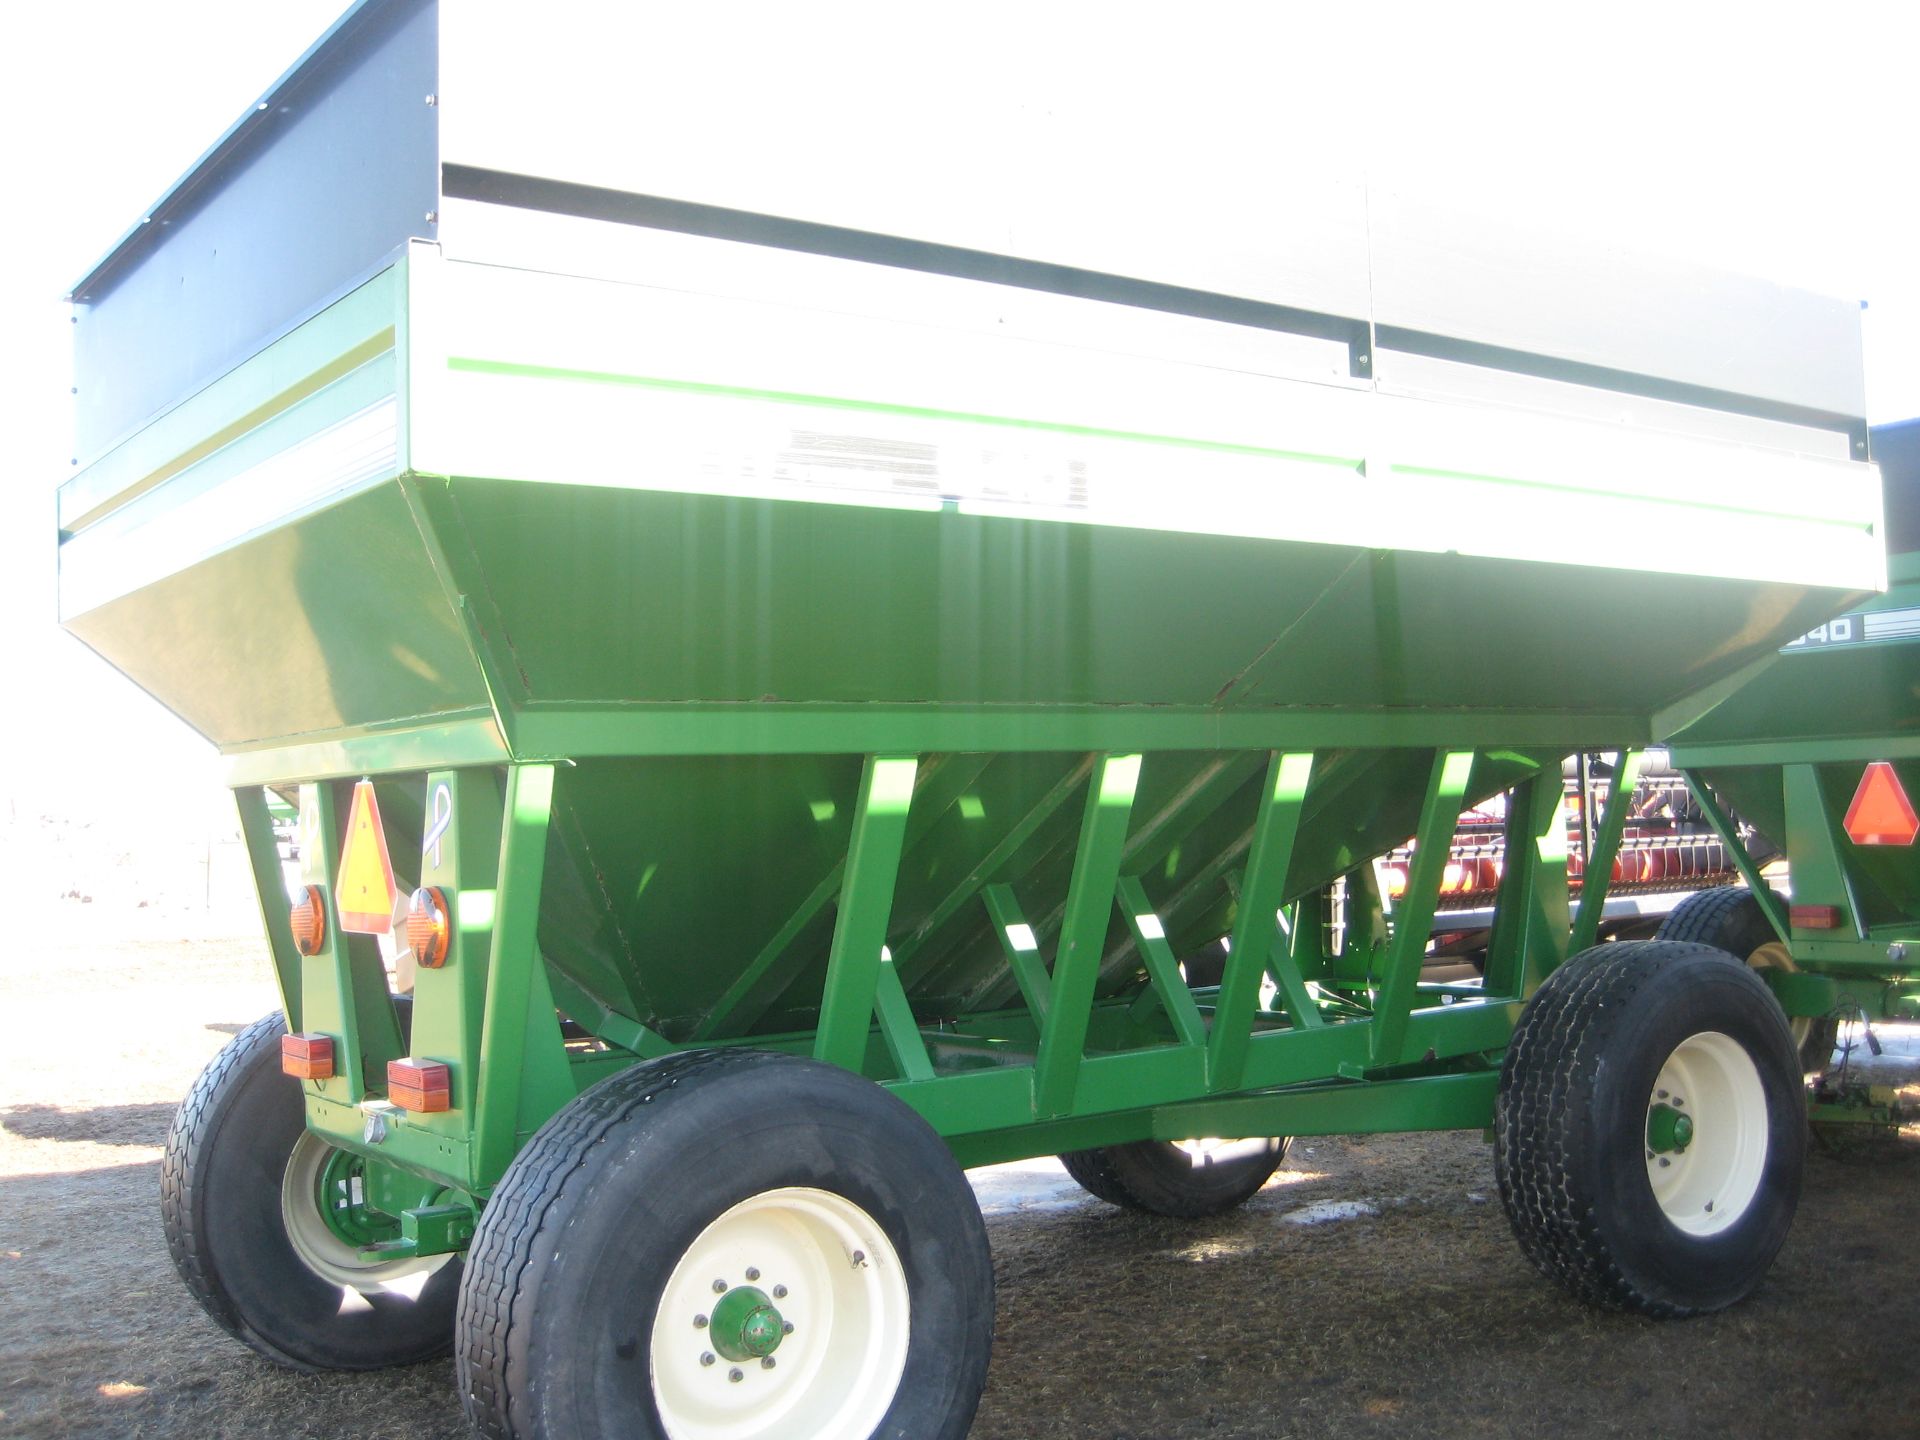 Brent 540 Gravity Wagon, 425-65R/22.5 tires, green - Image 2 of 15